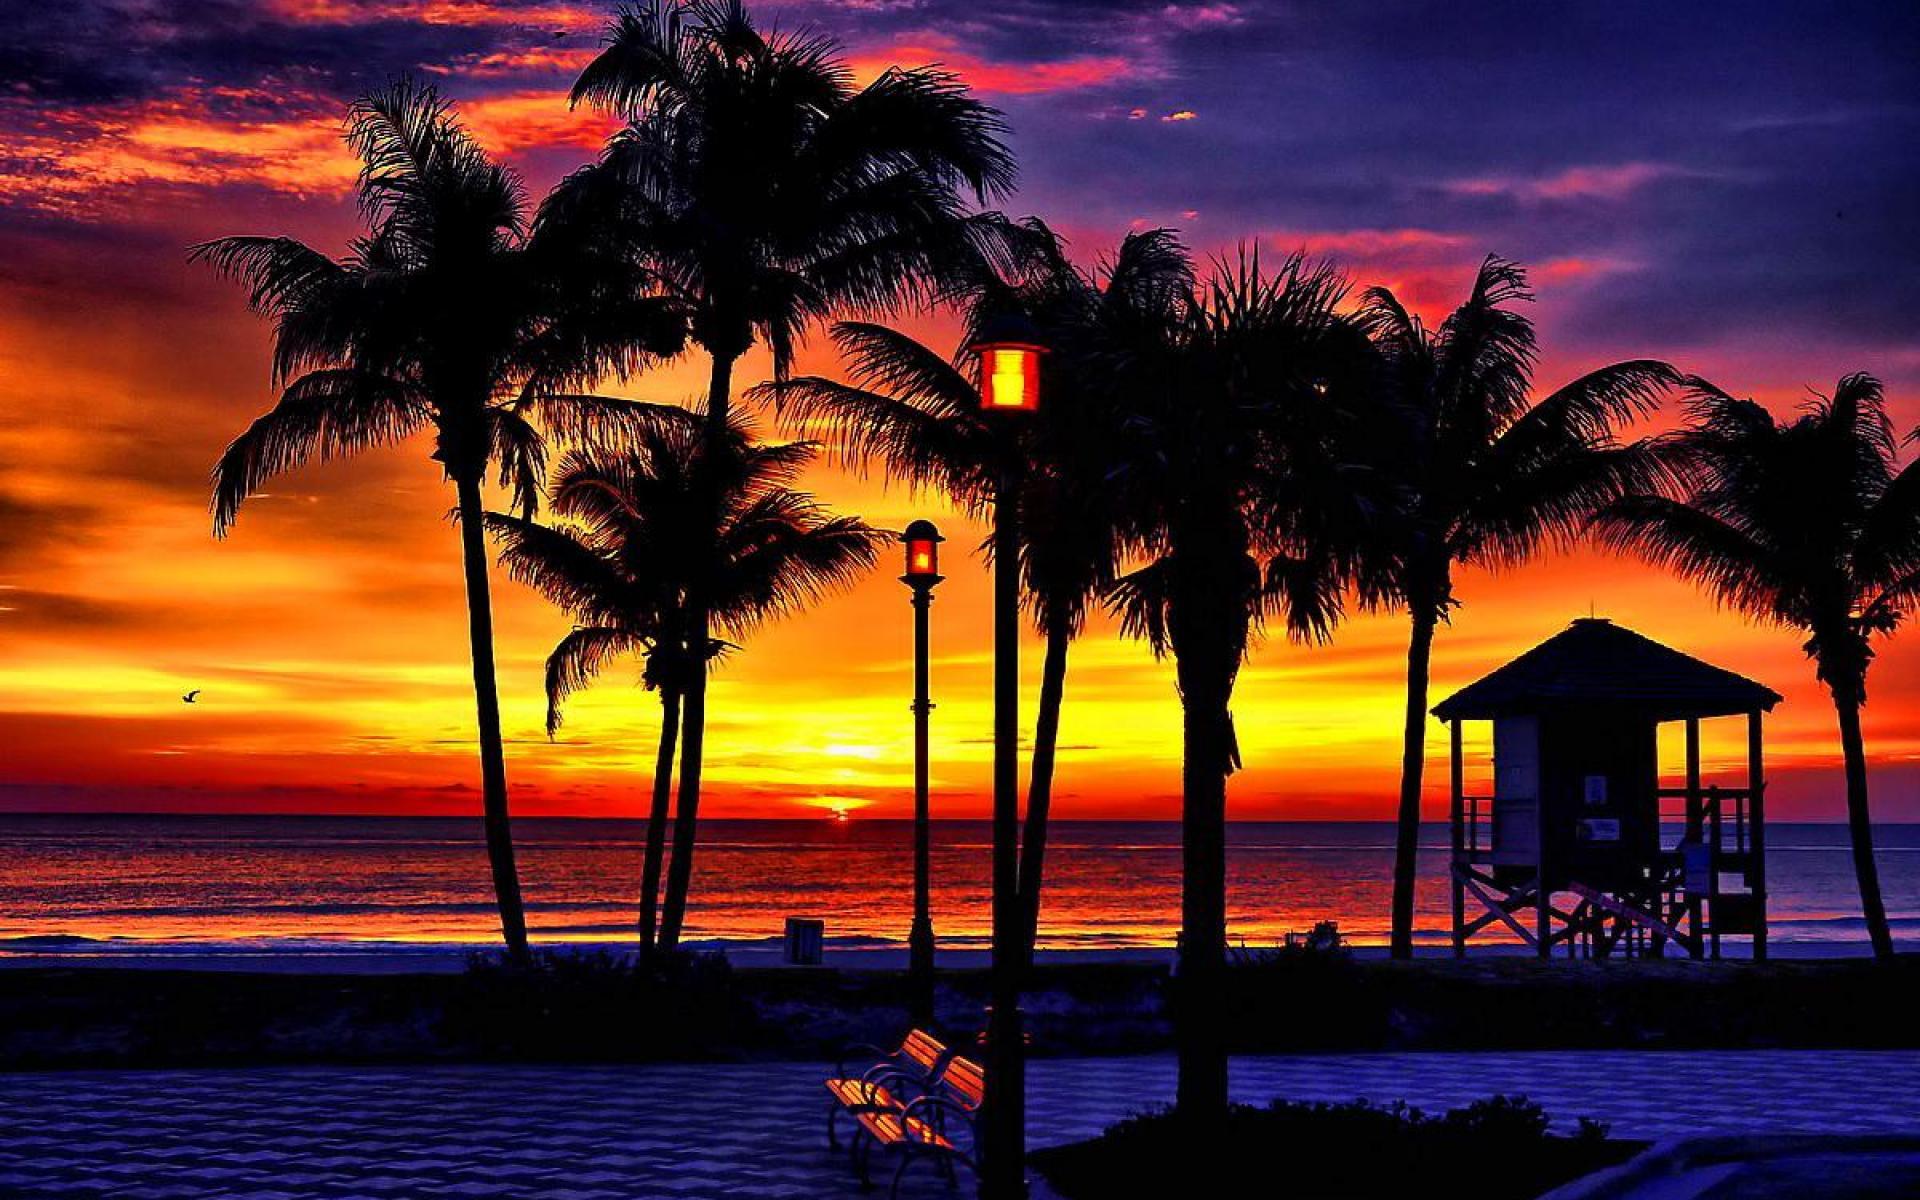 Cool Tropical Sunset Wallpaper for PC & Mac, Tablet, Laptop, Mobile